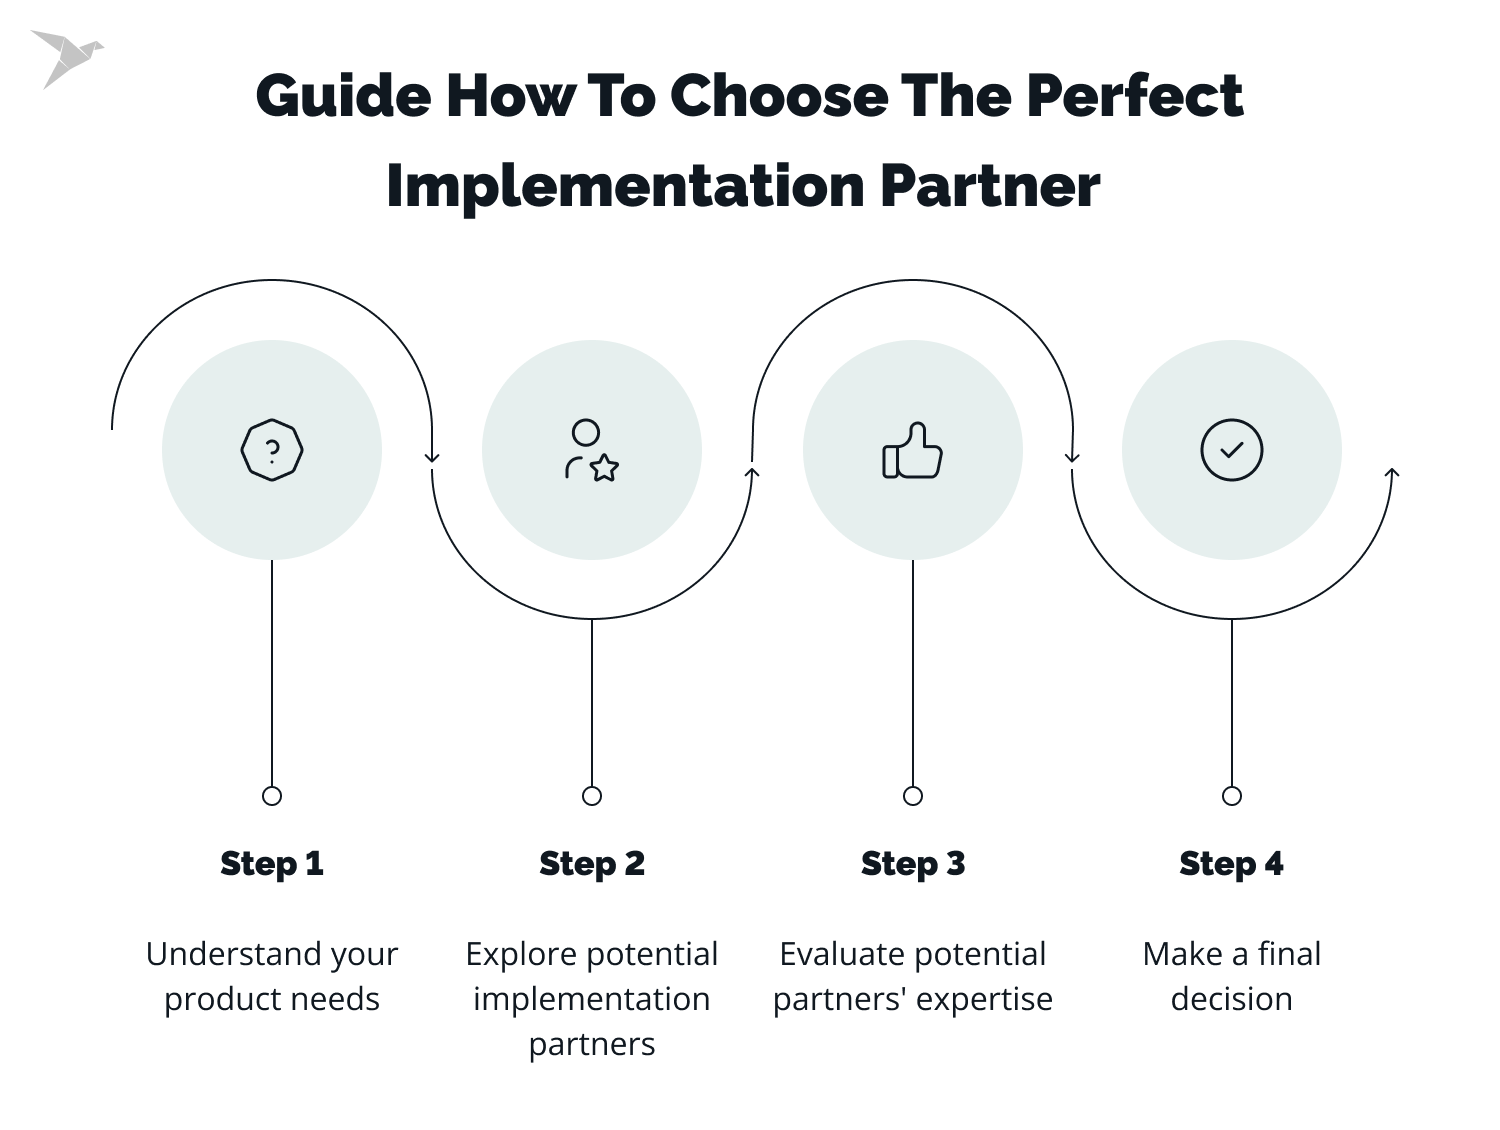 How to Choose the Perfect Implementation Partner for Your Product?